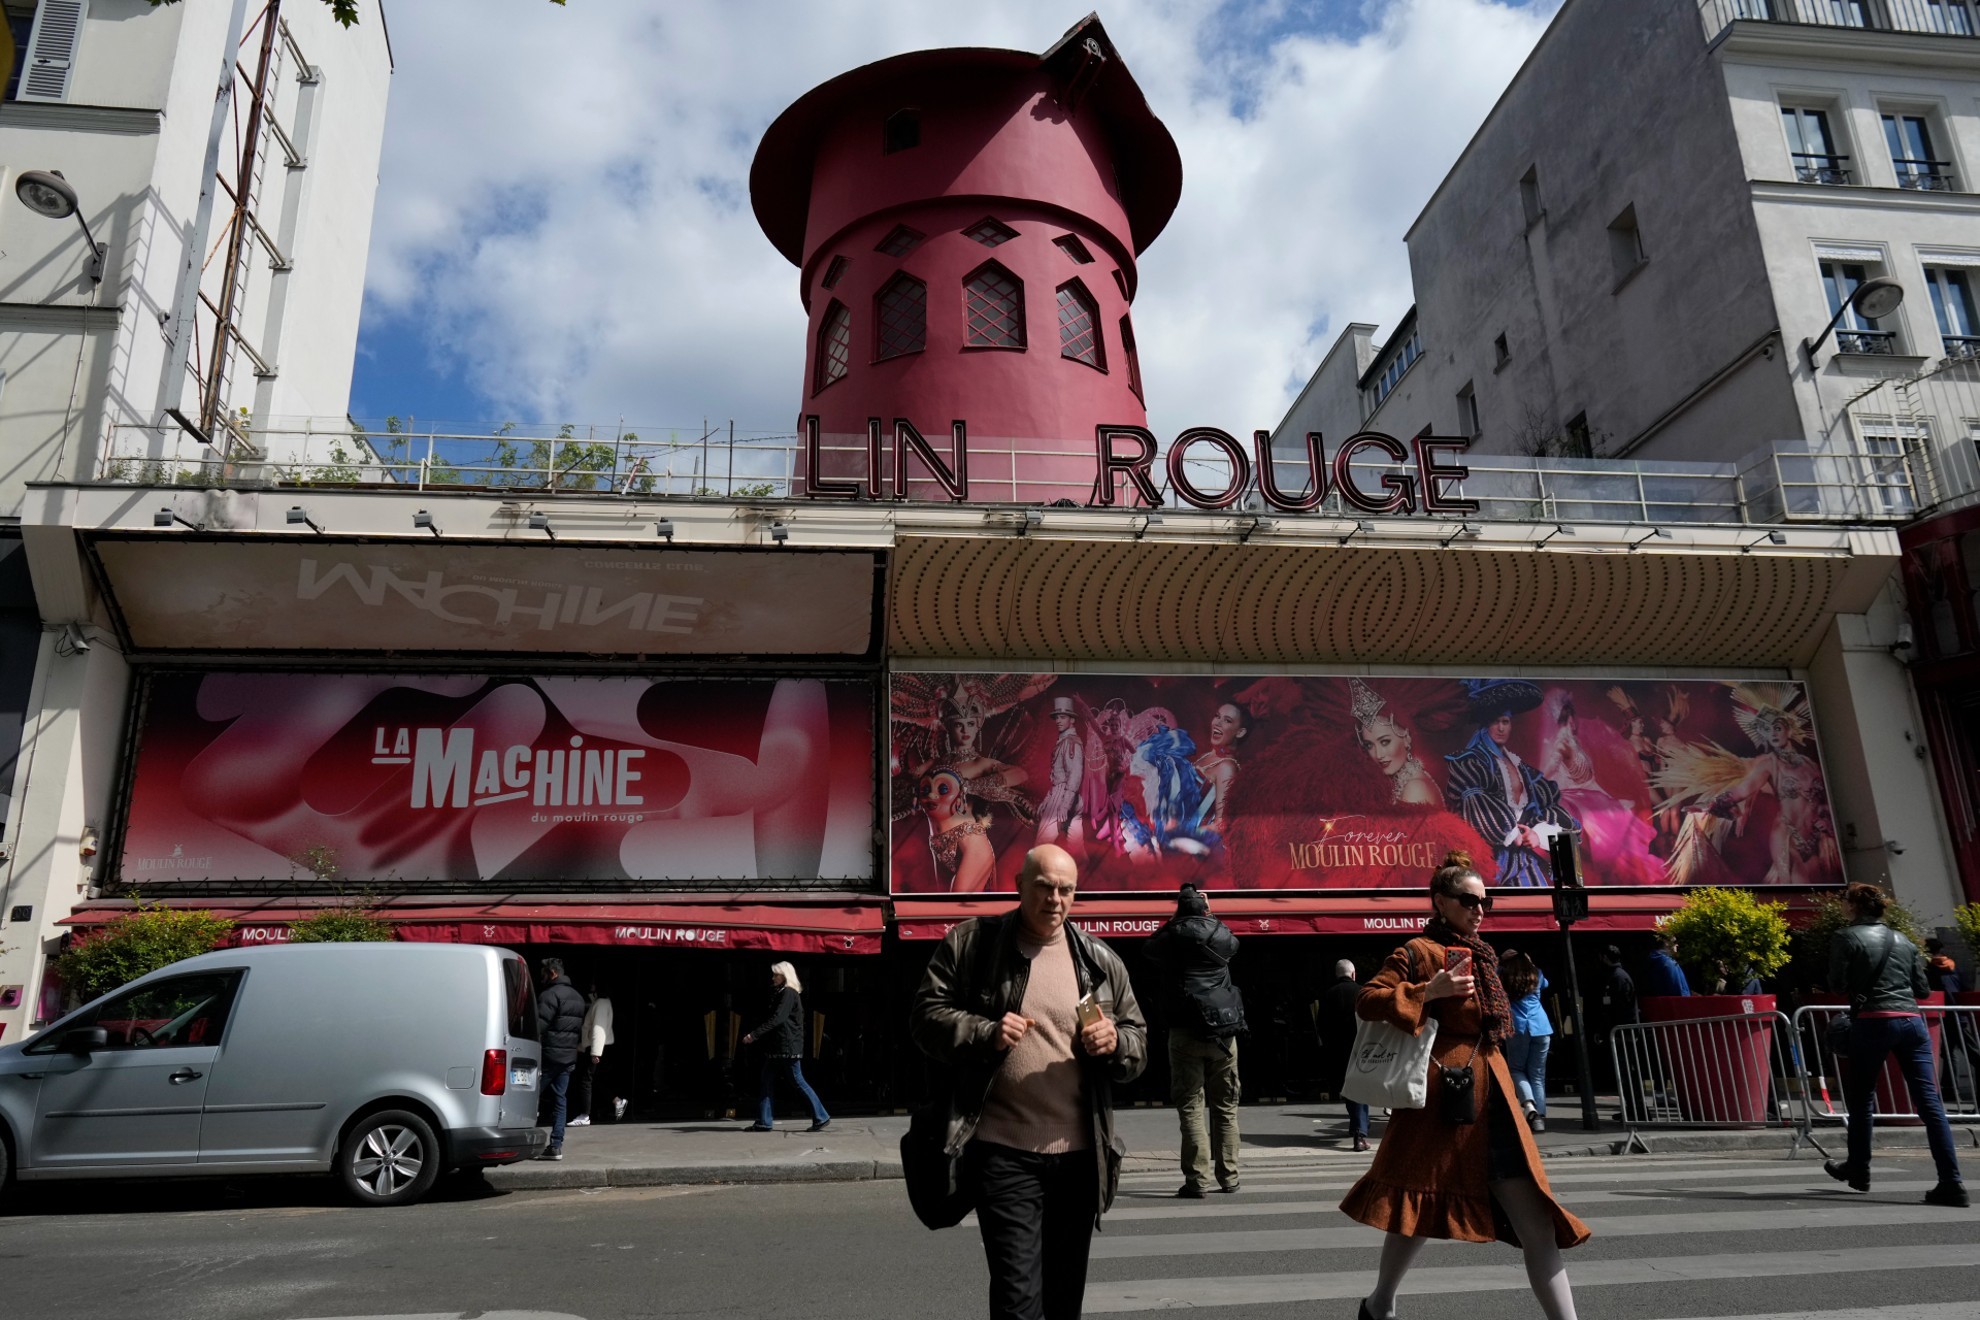 The windmill sails at Paris iconic Moulin Rouge have collapsed but no injuries are reported